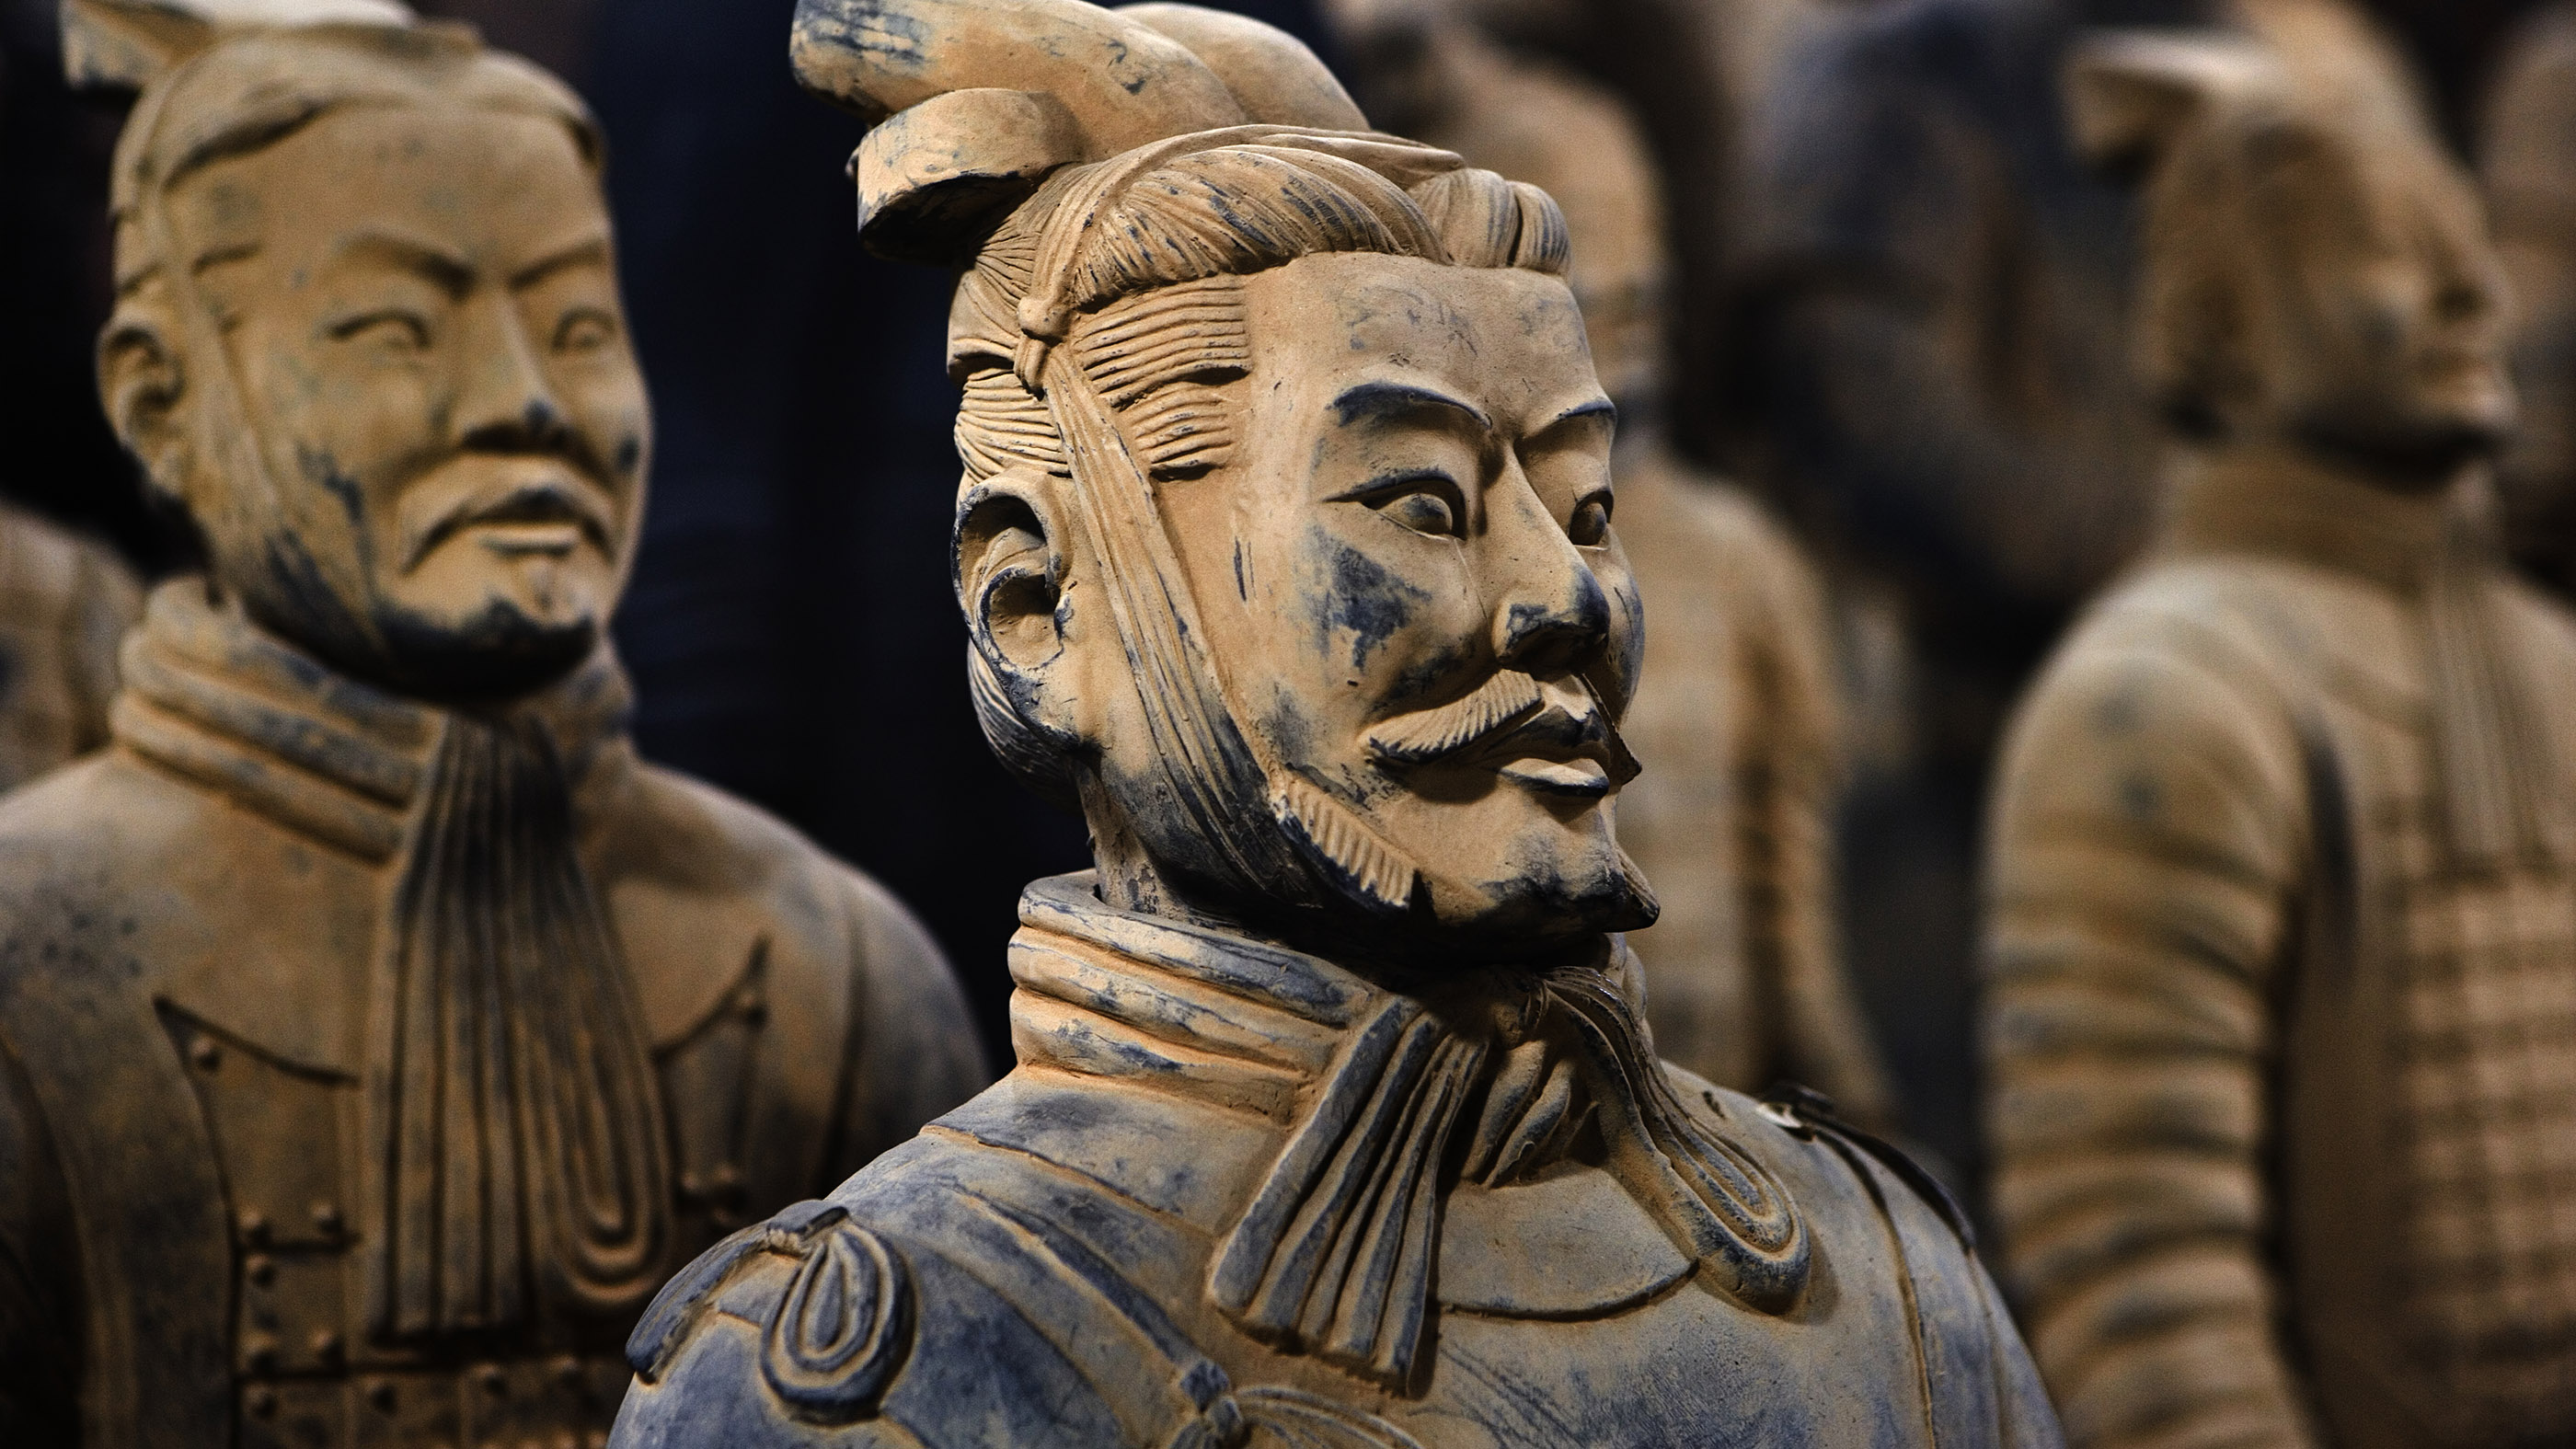 The Terracotta Warriors were created with life-like detail.